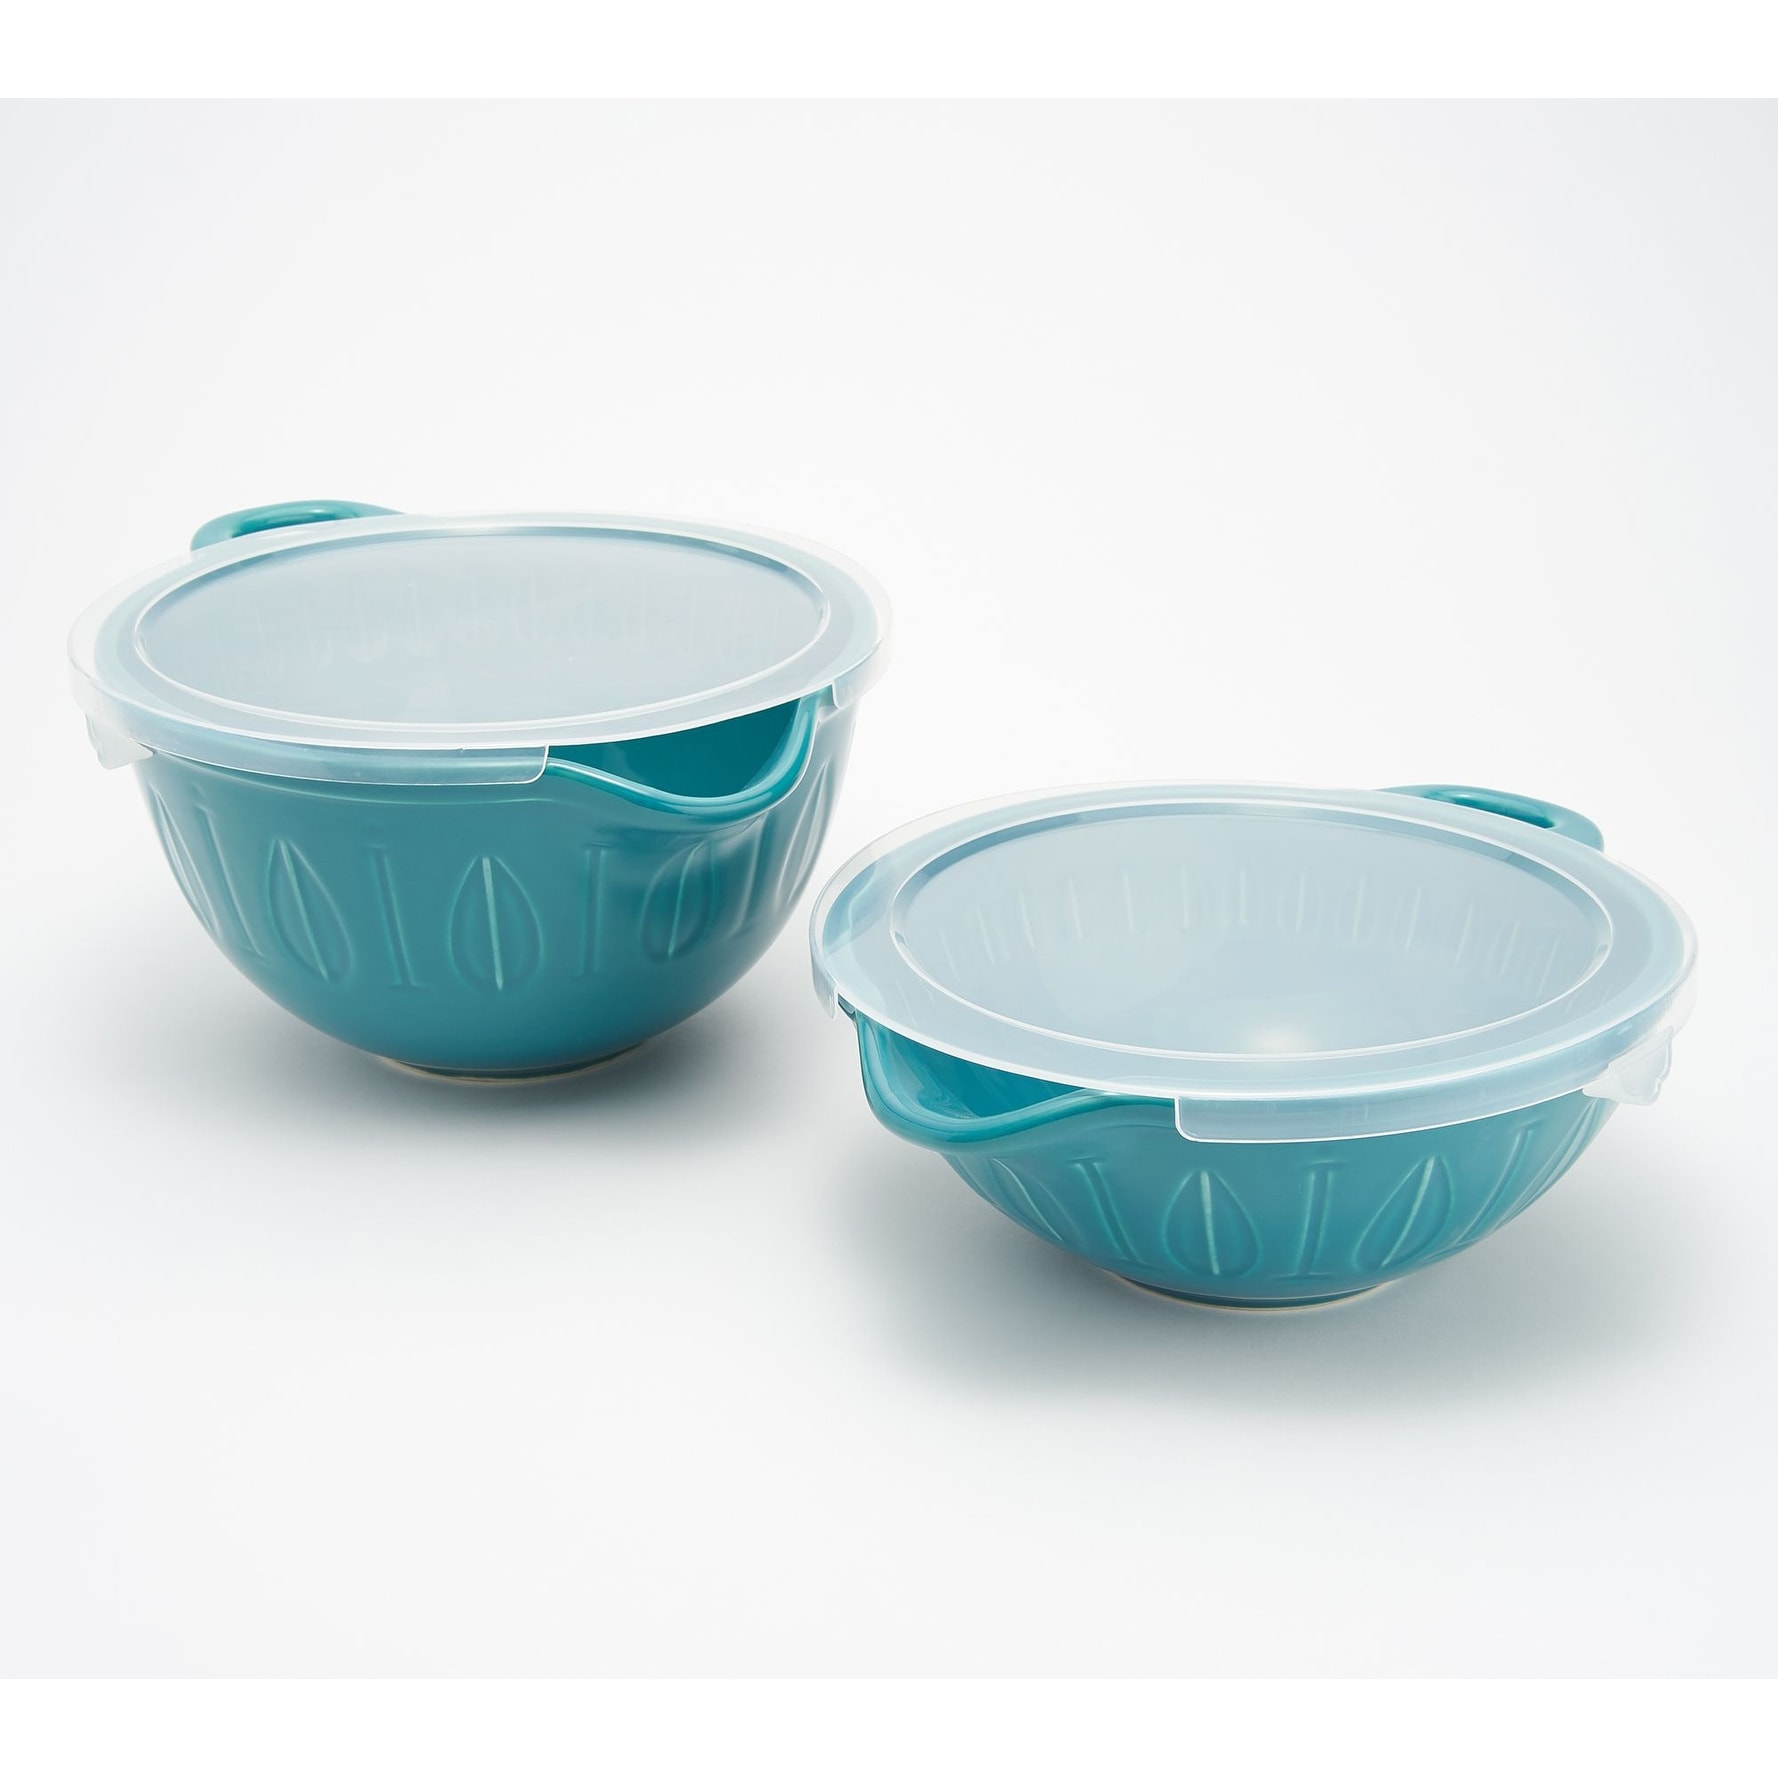 https://ak1.ostkcdn.com/images/products/is/images/direct/17bb63dd1a7fcb1fc9d33214785aaf78e93bb2a4/Mad-Hungry-2-Piece-Lip%27n%27Loop-Mixing-Bowl-with-Lids-Model-K48001.jpg